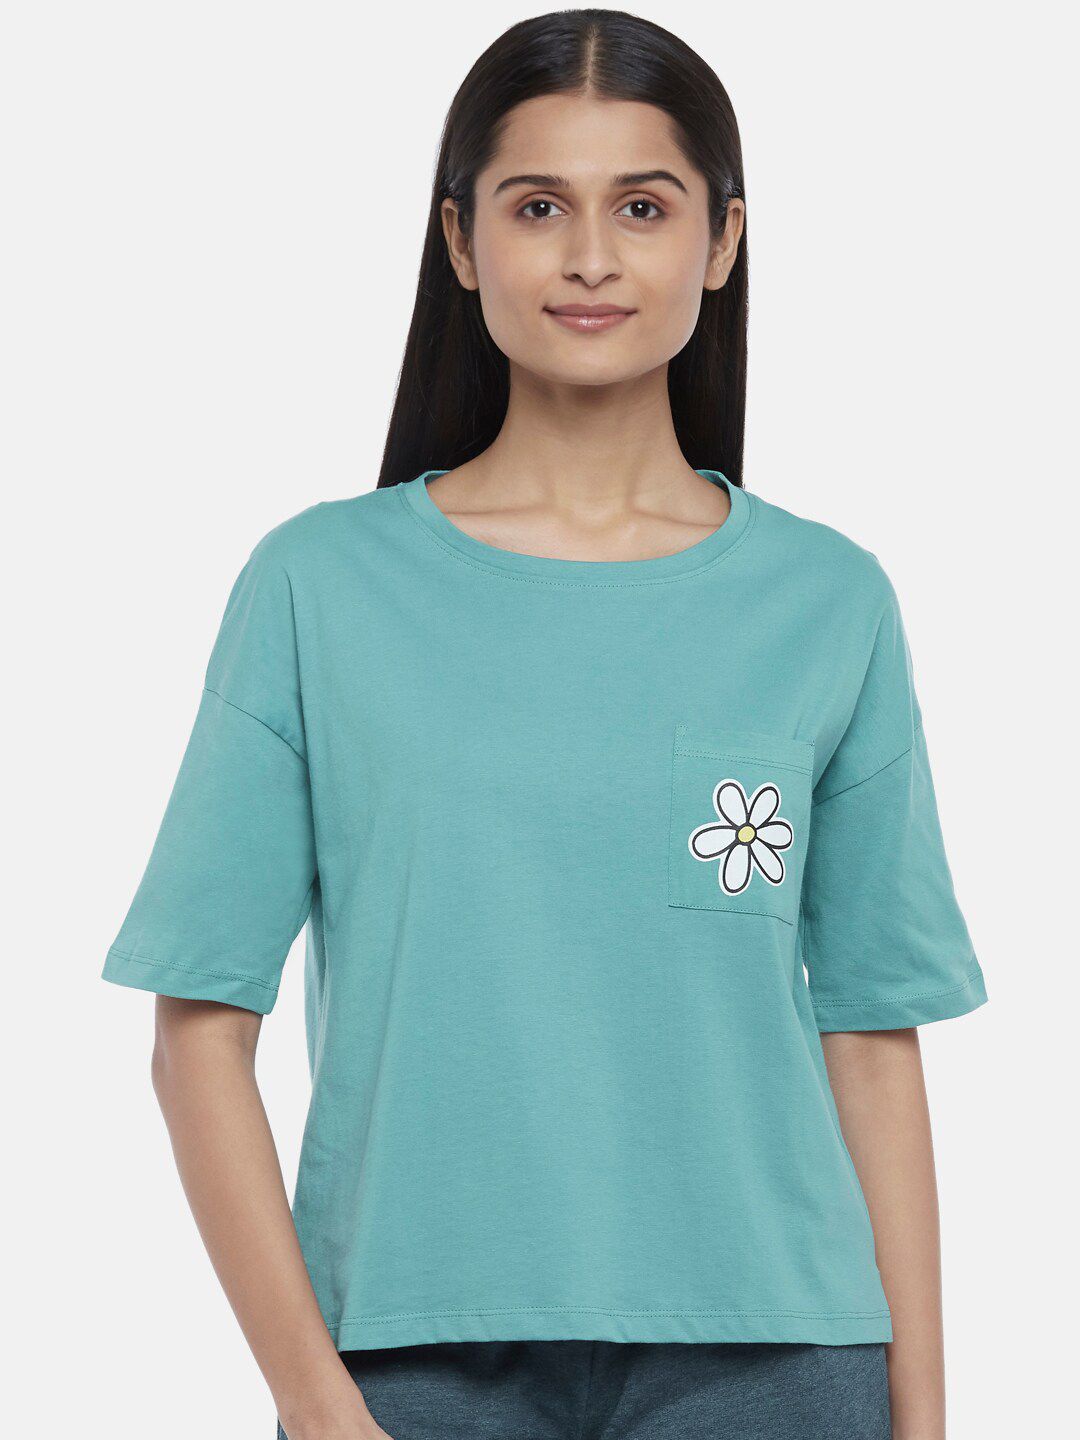 Dreamz by Pantaloons Turquoise Blue Pure Cotton Lounge tshirt Price in India